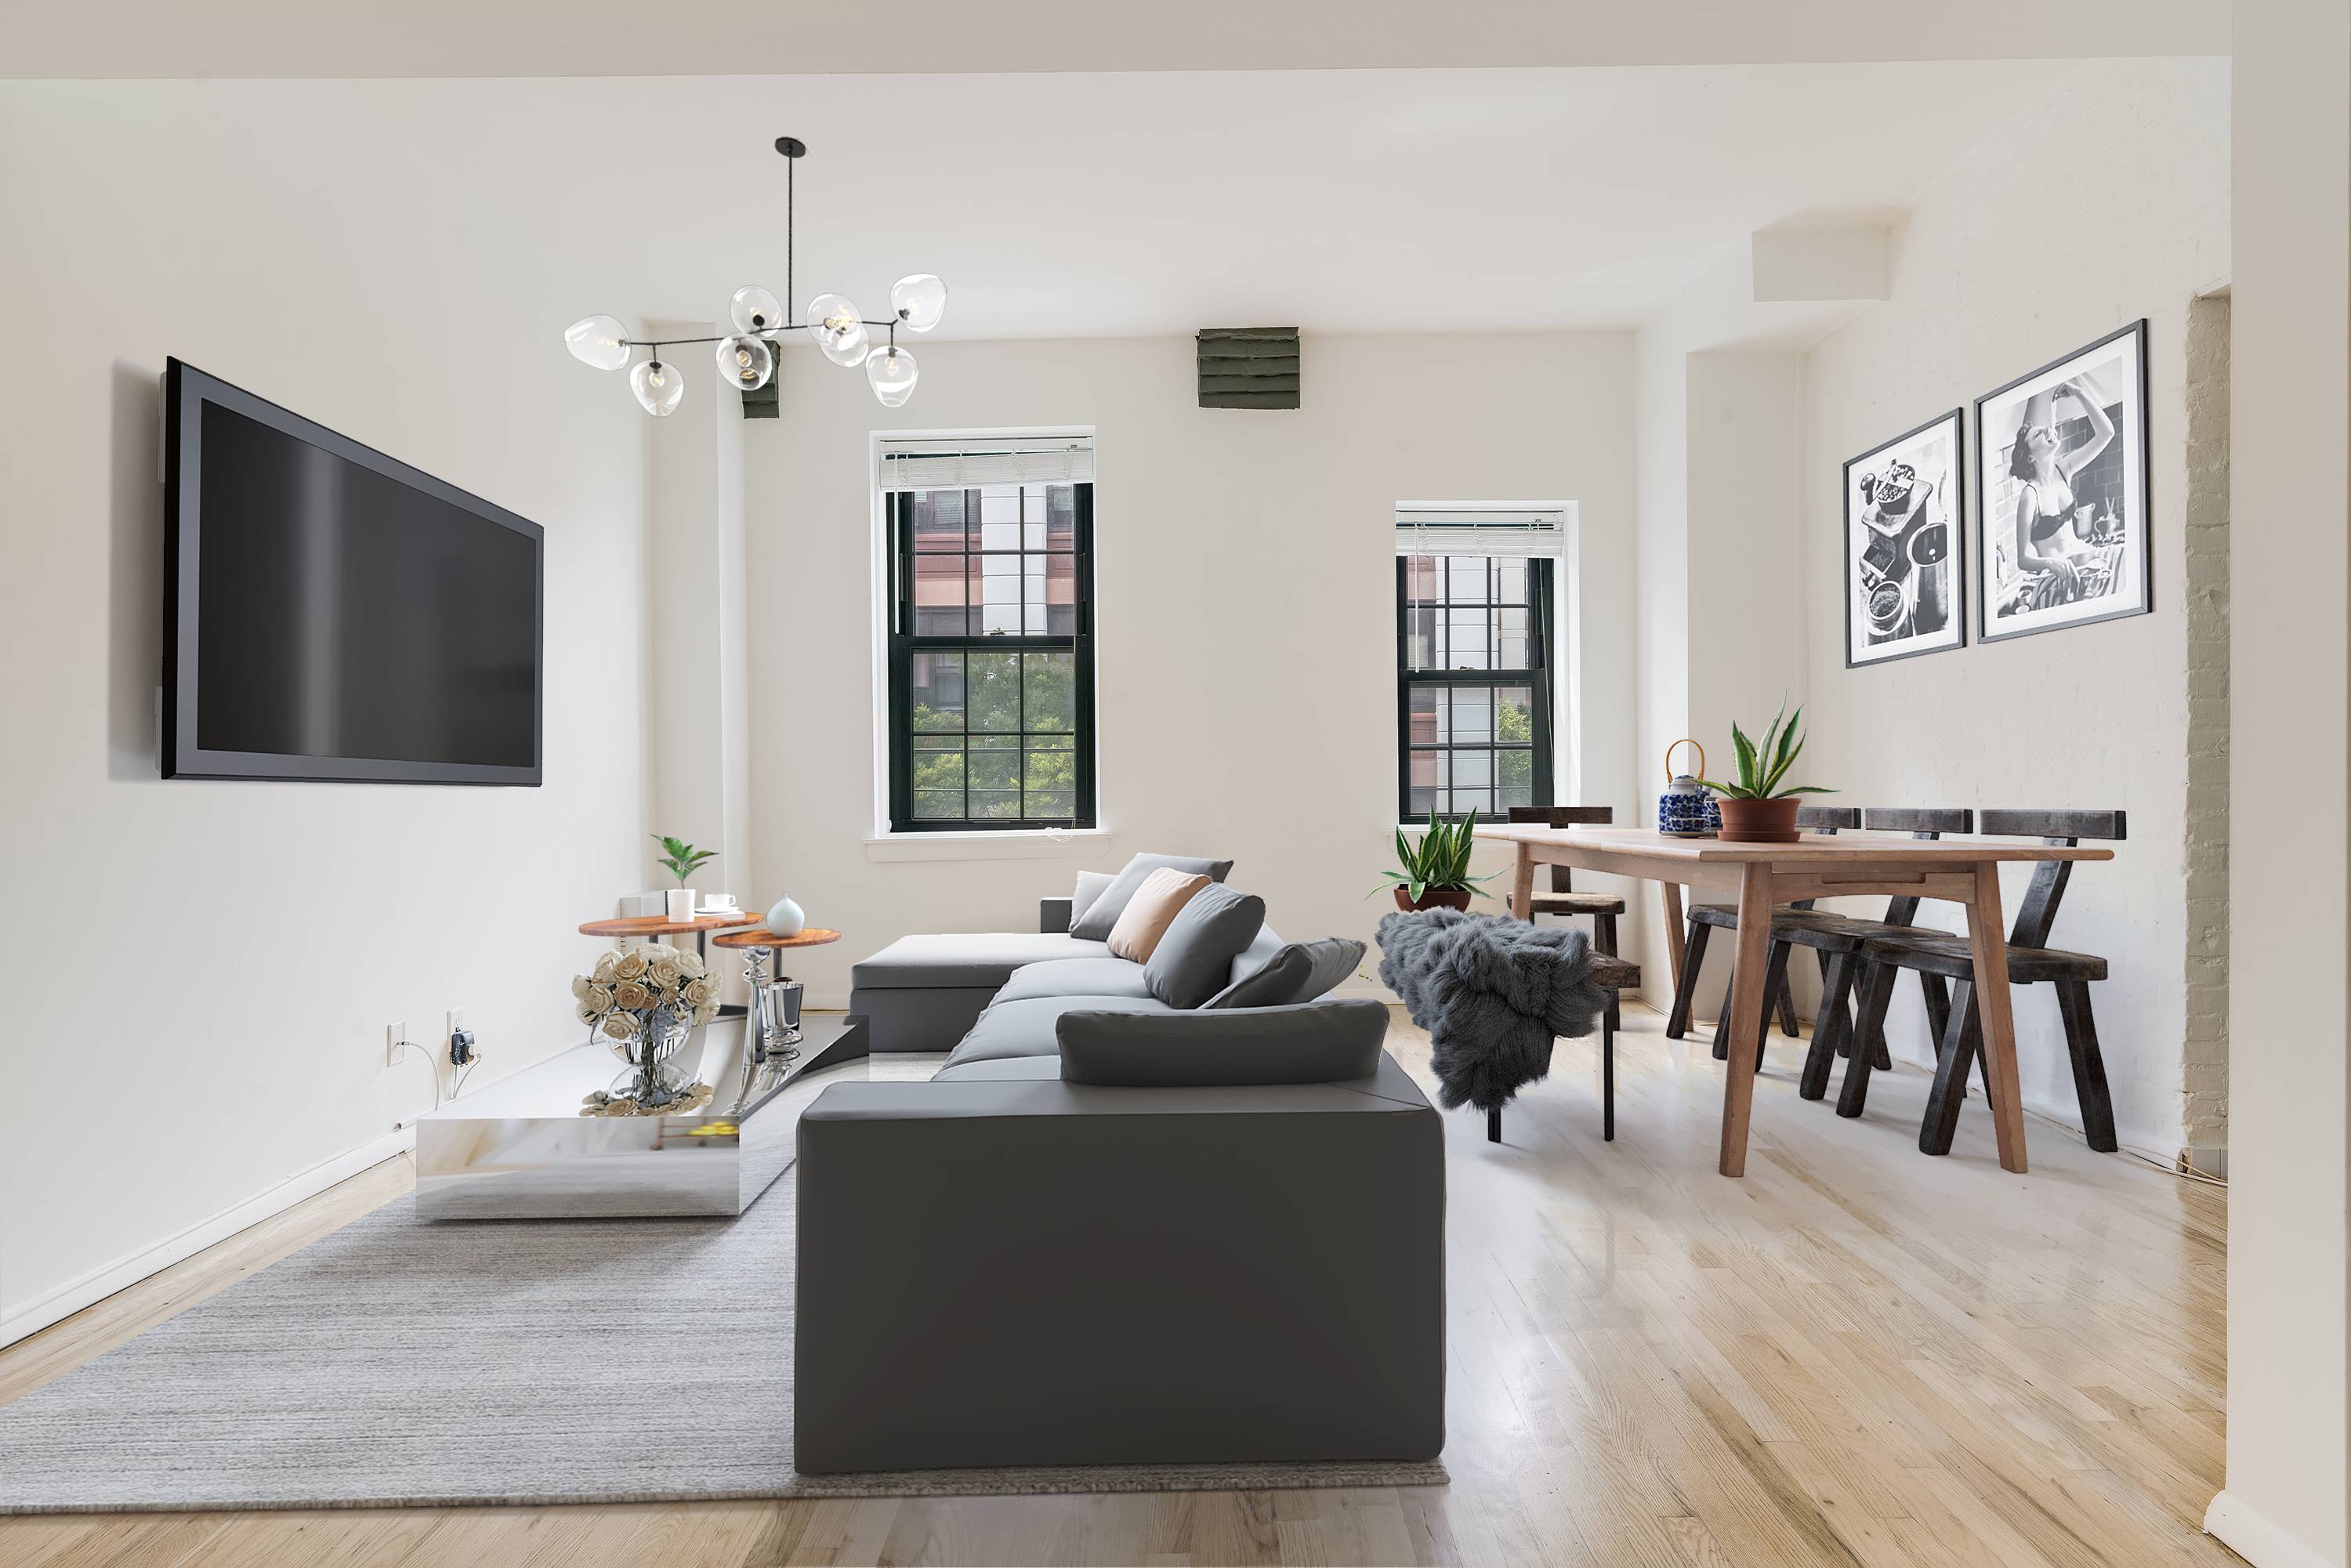 One of a Kind 2 Bedroom 1.5 Bath Soho-Loft Style Home in Downtown Hoboken!  Washer/Dryer In Unit.  Minutes to the Hoboken  Path Train and Bus Lines! Onsite Parking!  Pet Friendly!